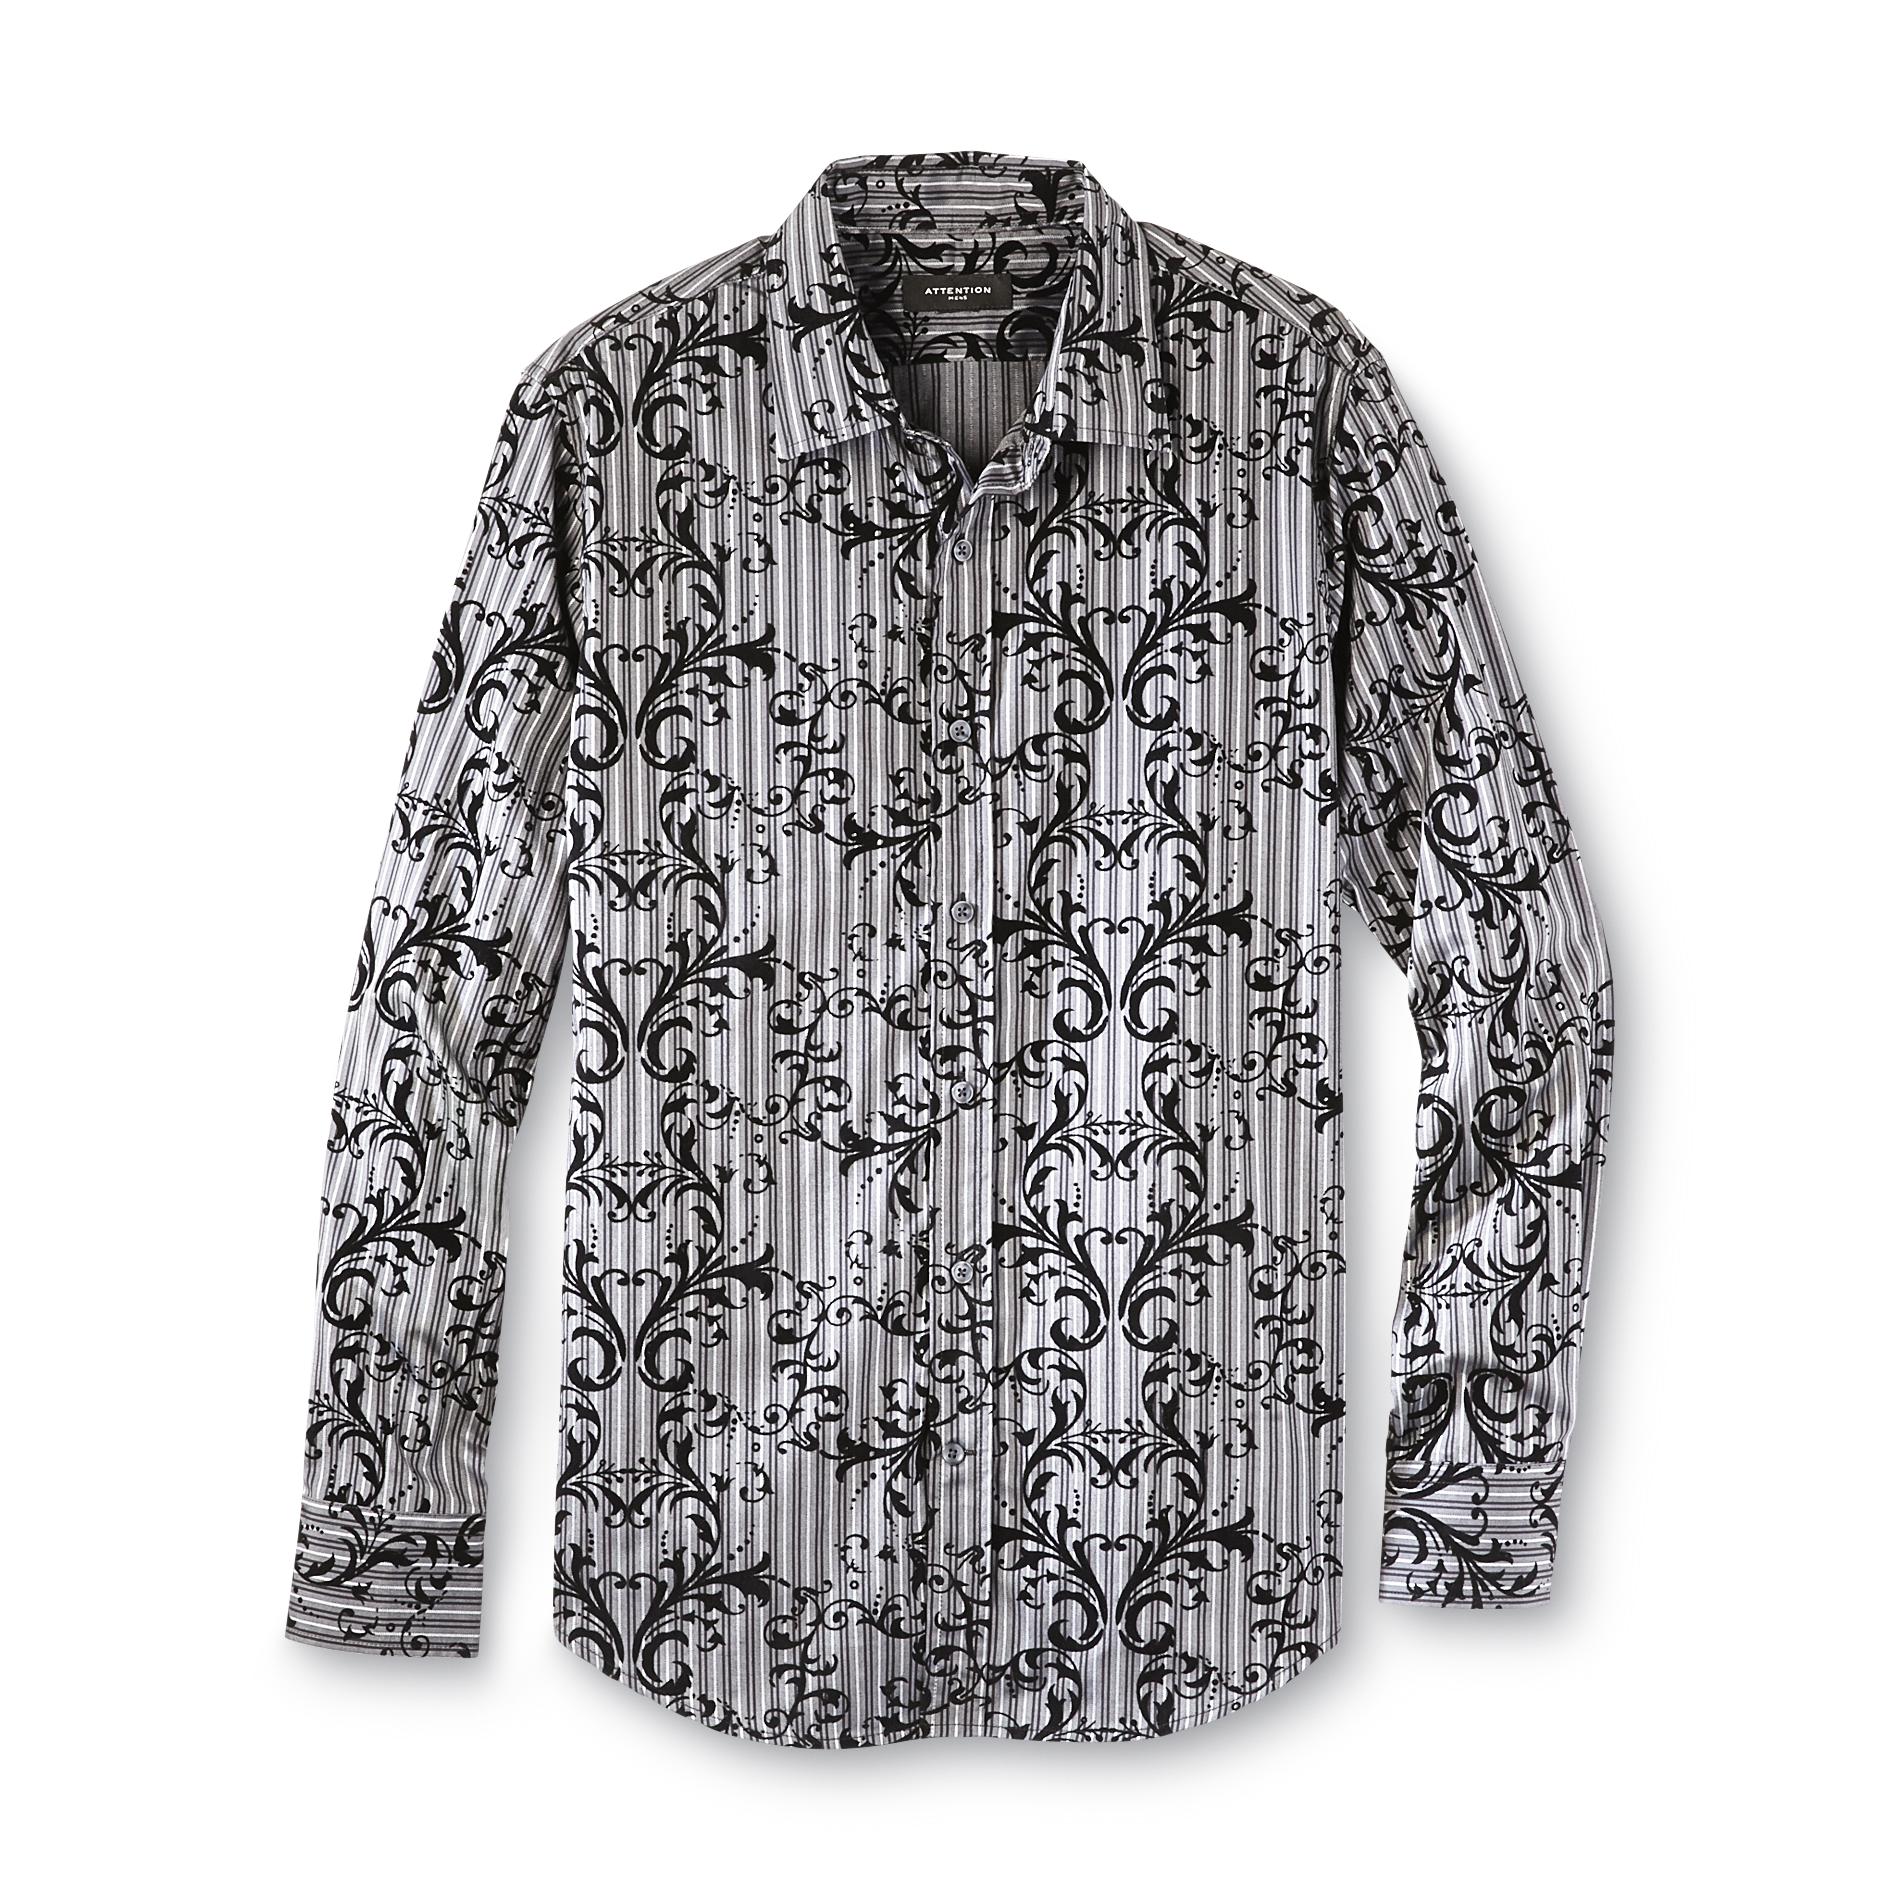 Attention Men's Embroidered Woven Shirt - Striped